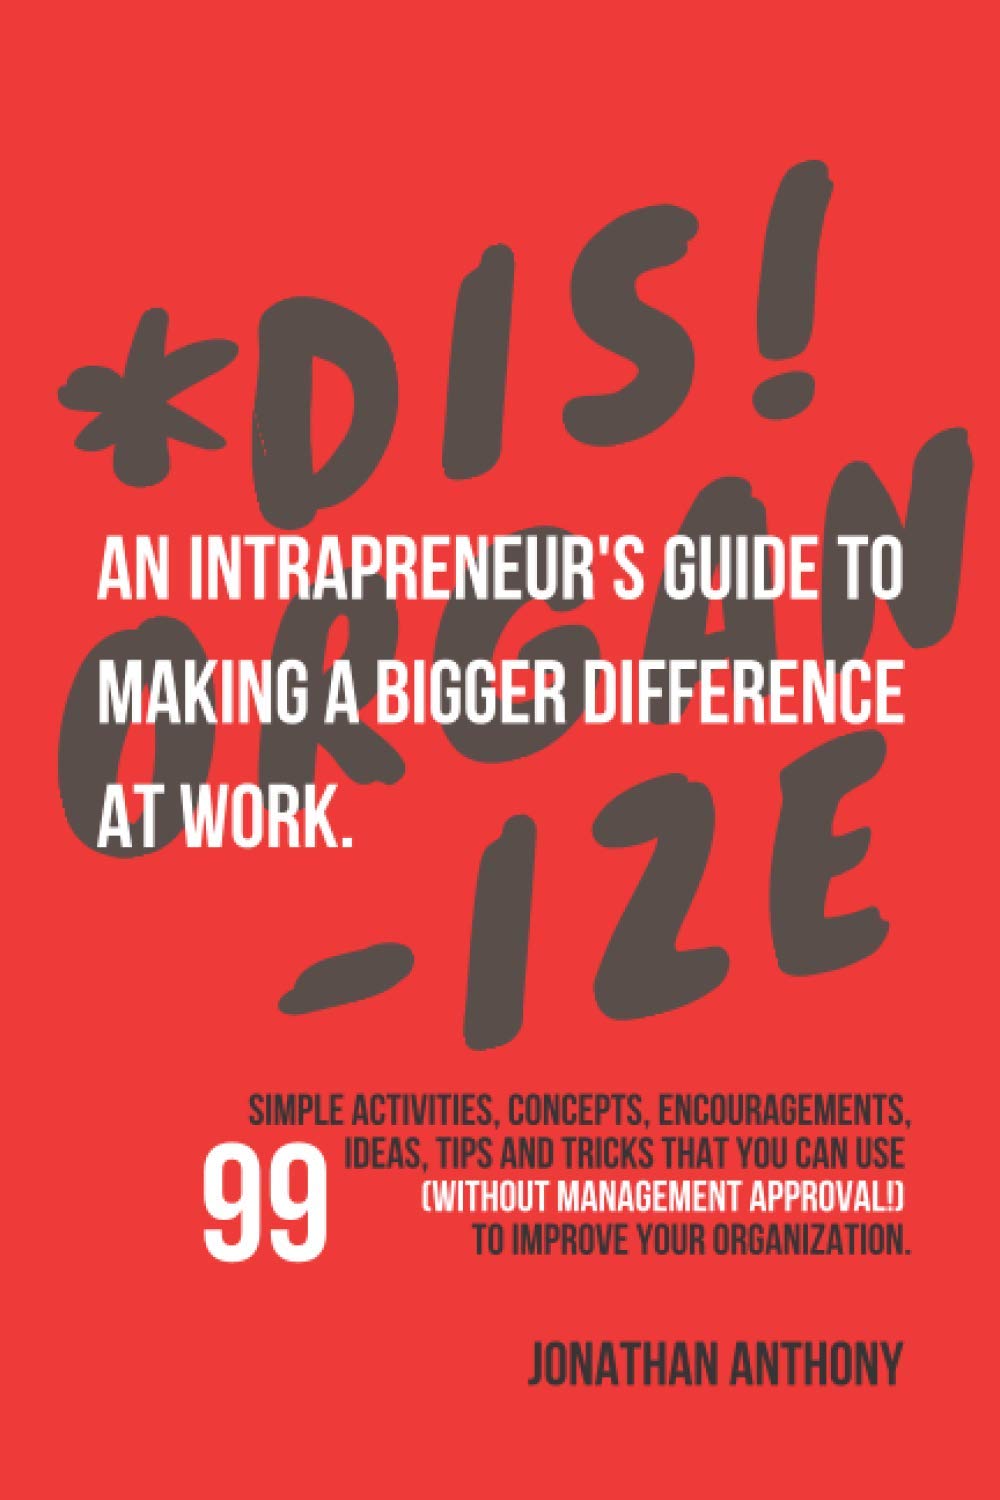 Disorganize by Jonathan Anthony Offers Insights for Intrapreneurs